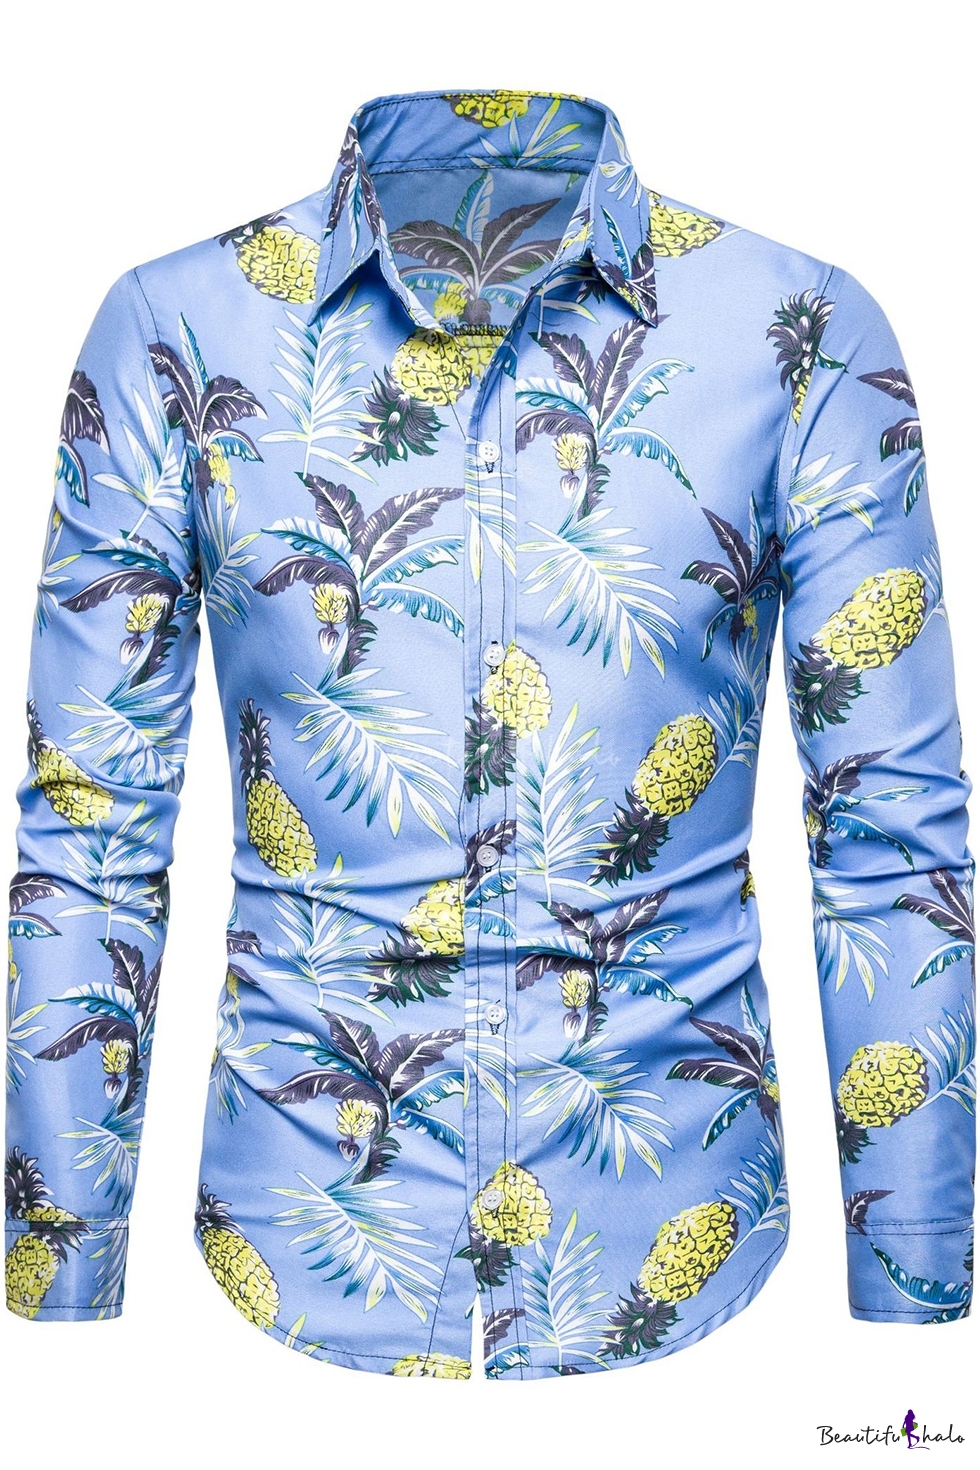 selecting-the-right-proteck-d-emf-button-up-shirts-telegraph